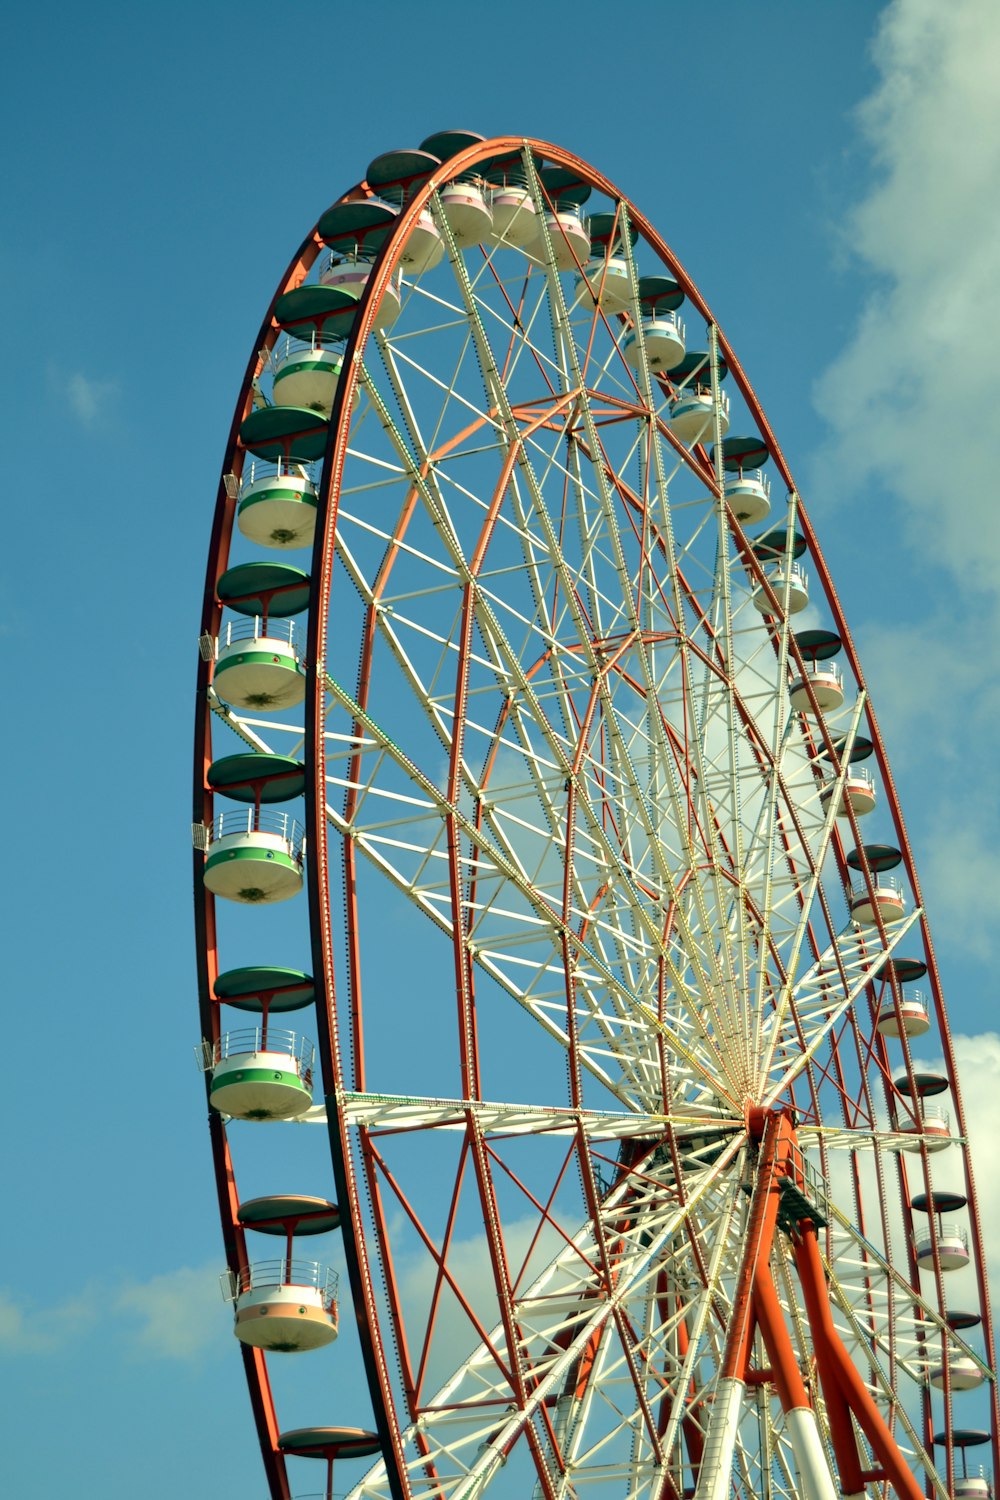 white and green ferris wheel under blue sky during daytime